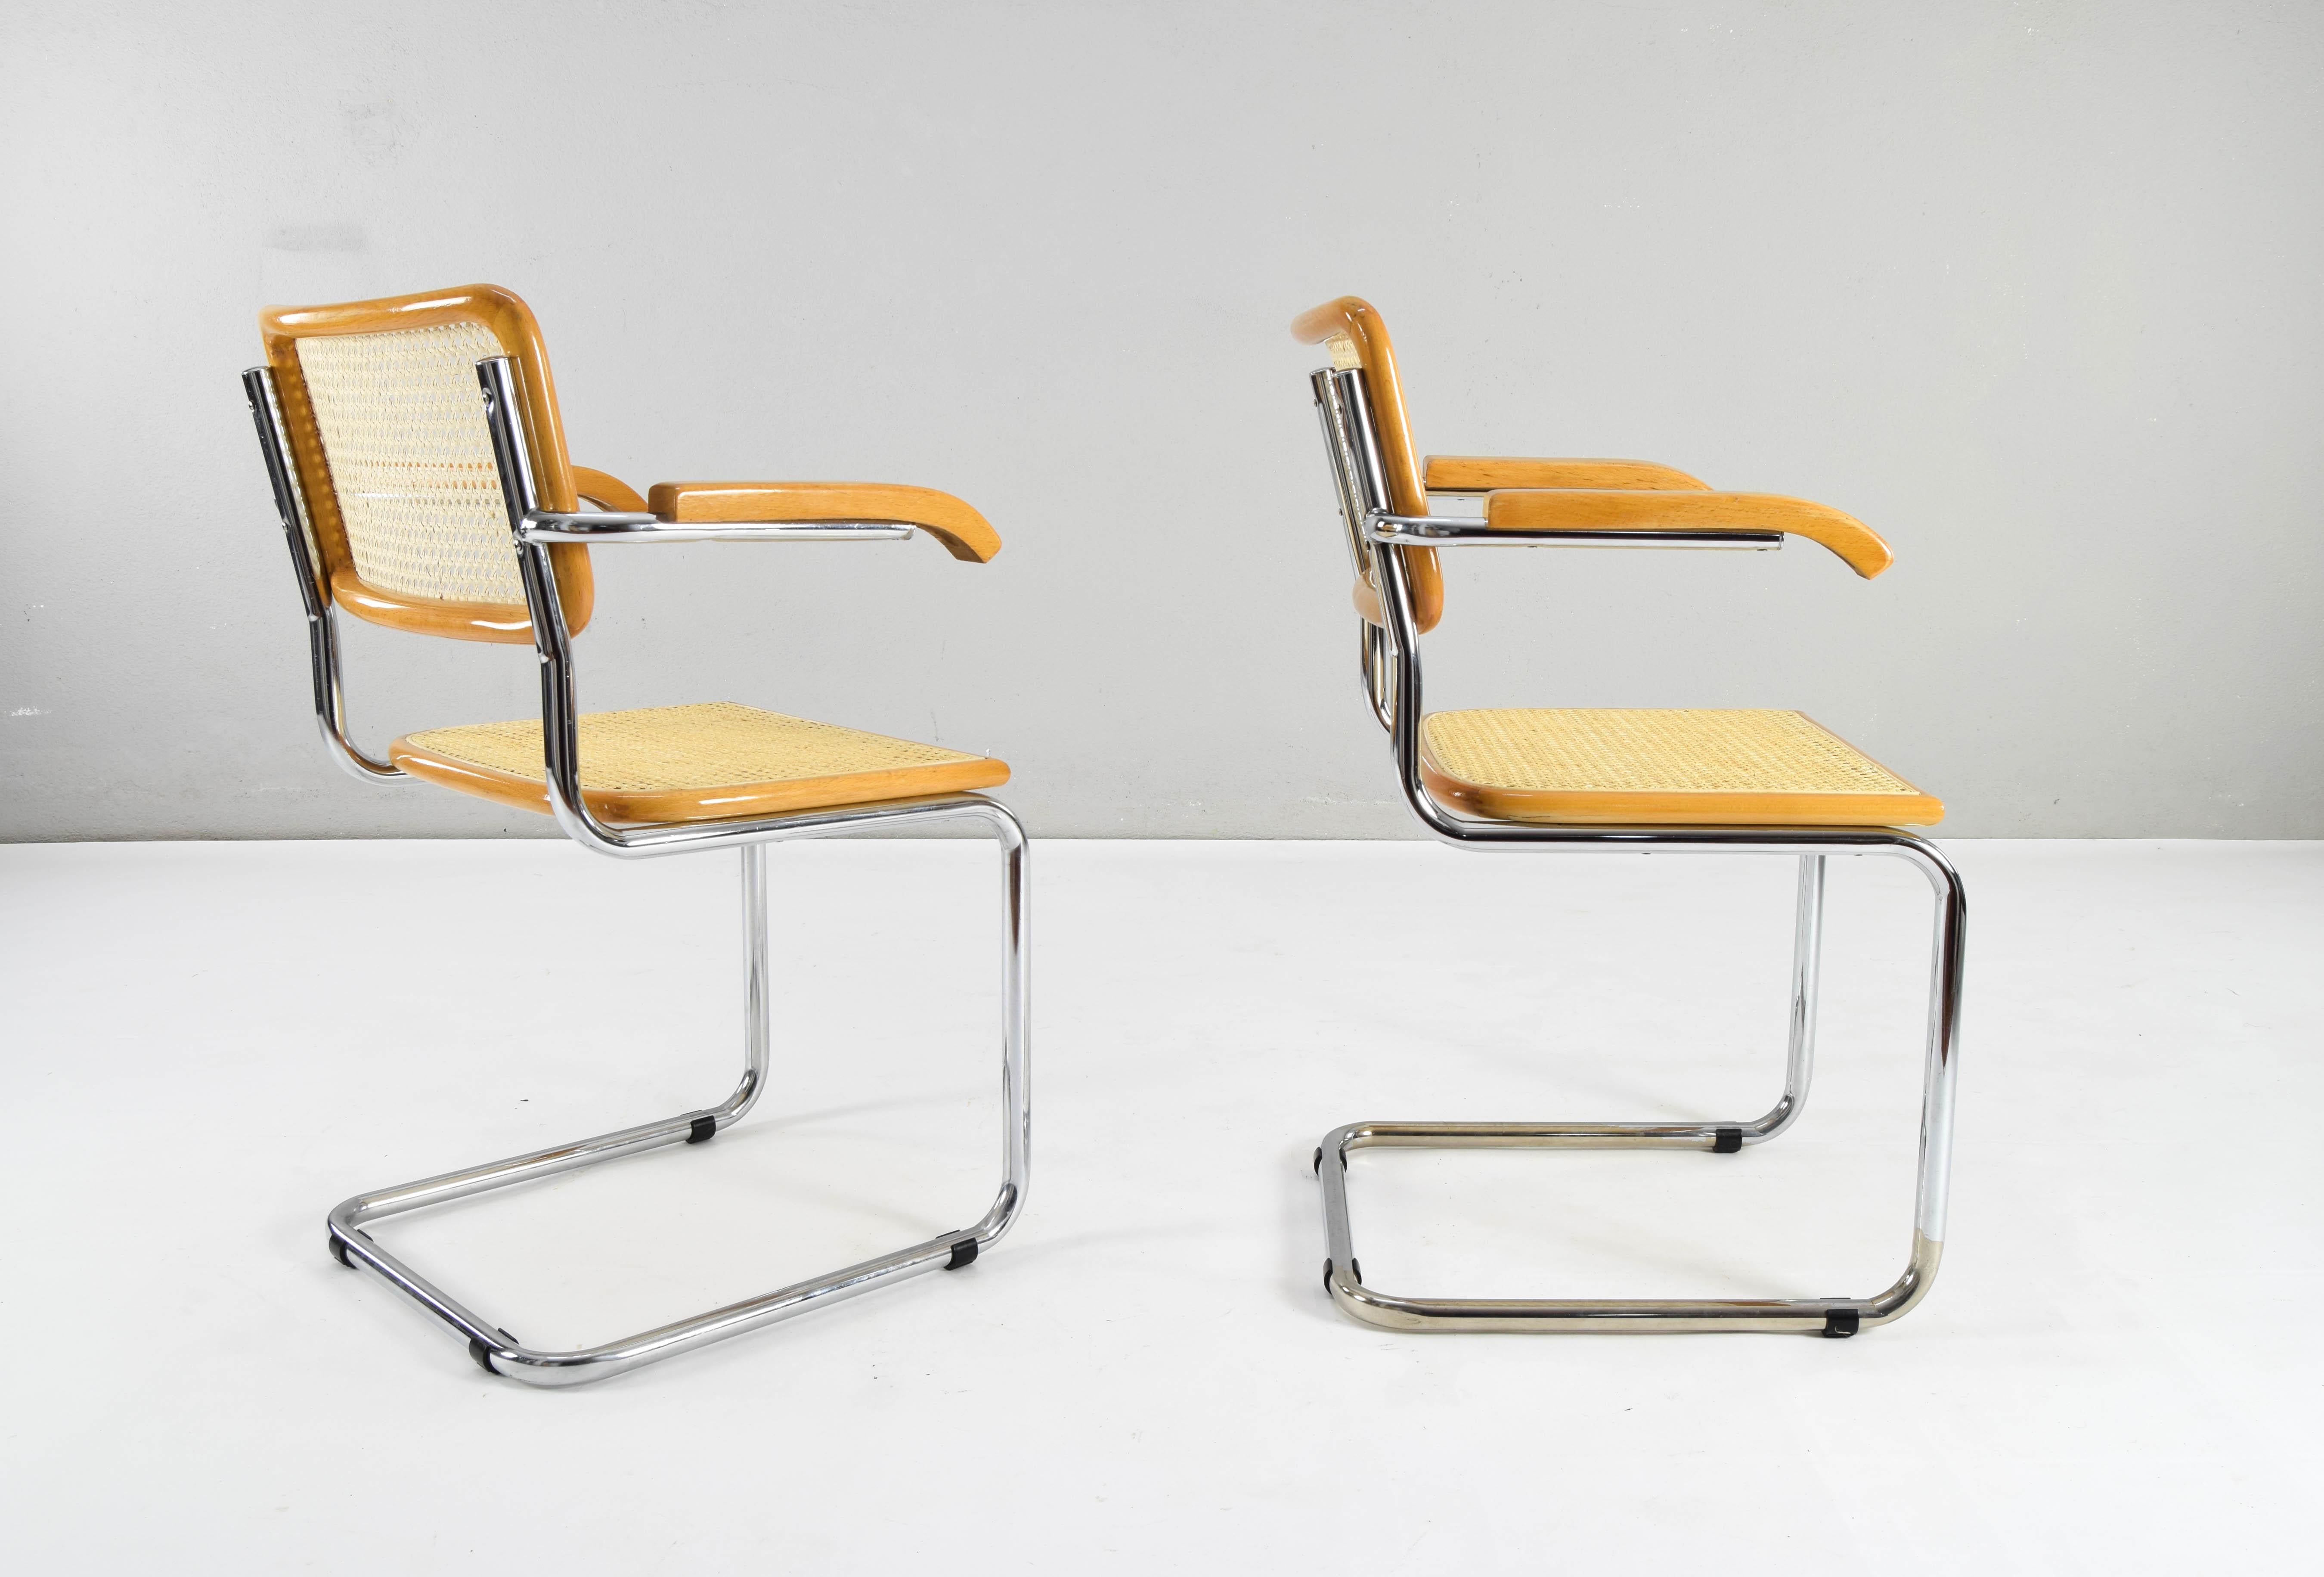  Set of Two Mid-Century Modern Marcel Breuer B64 Blonde Cesca Chairs, Italy, 70s For Sale 4